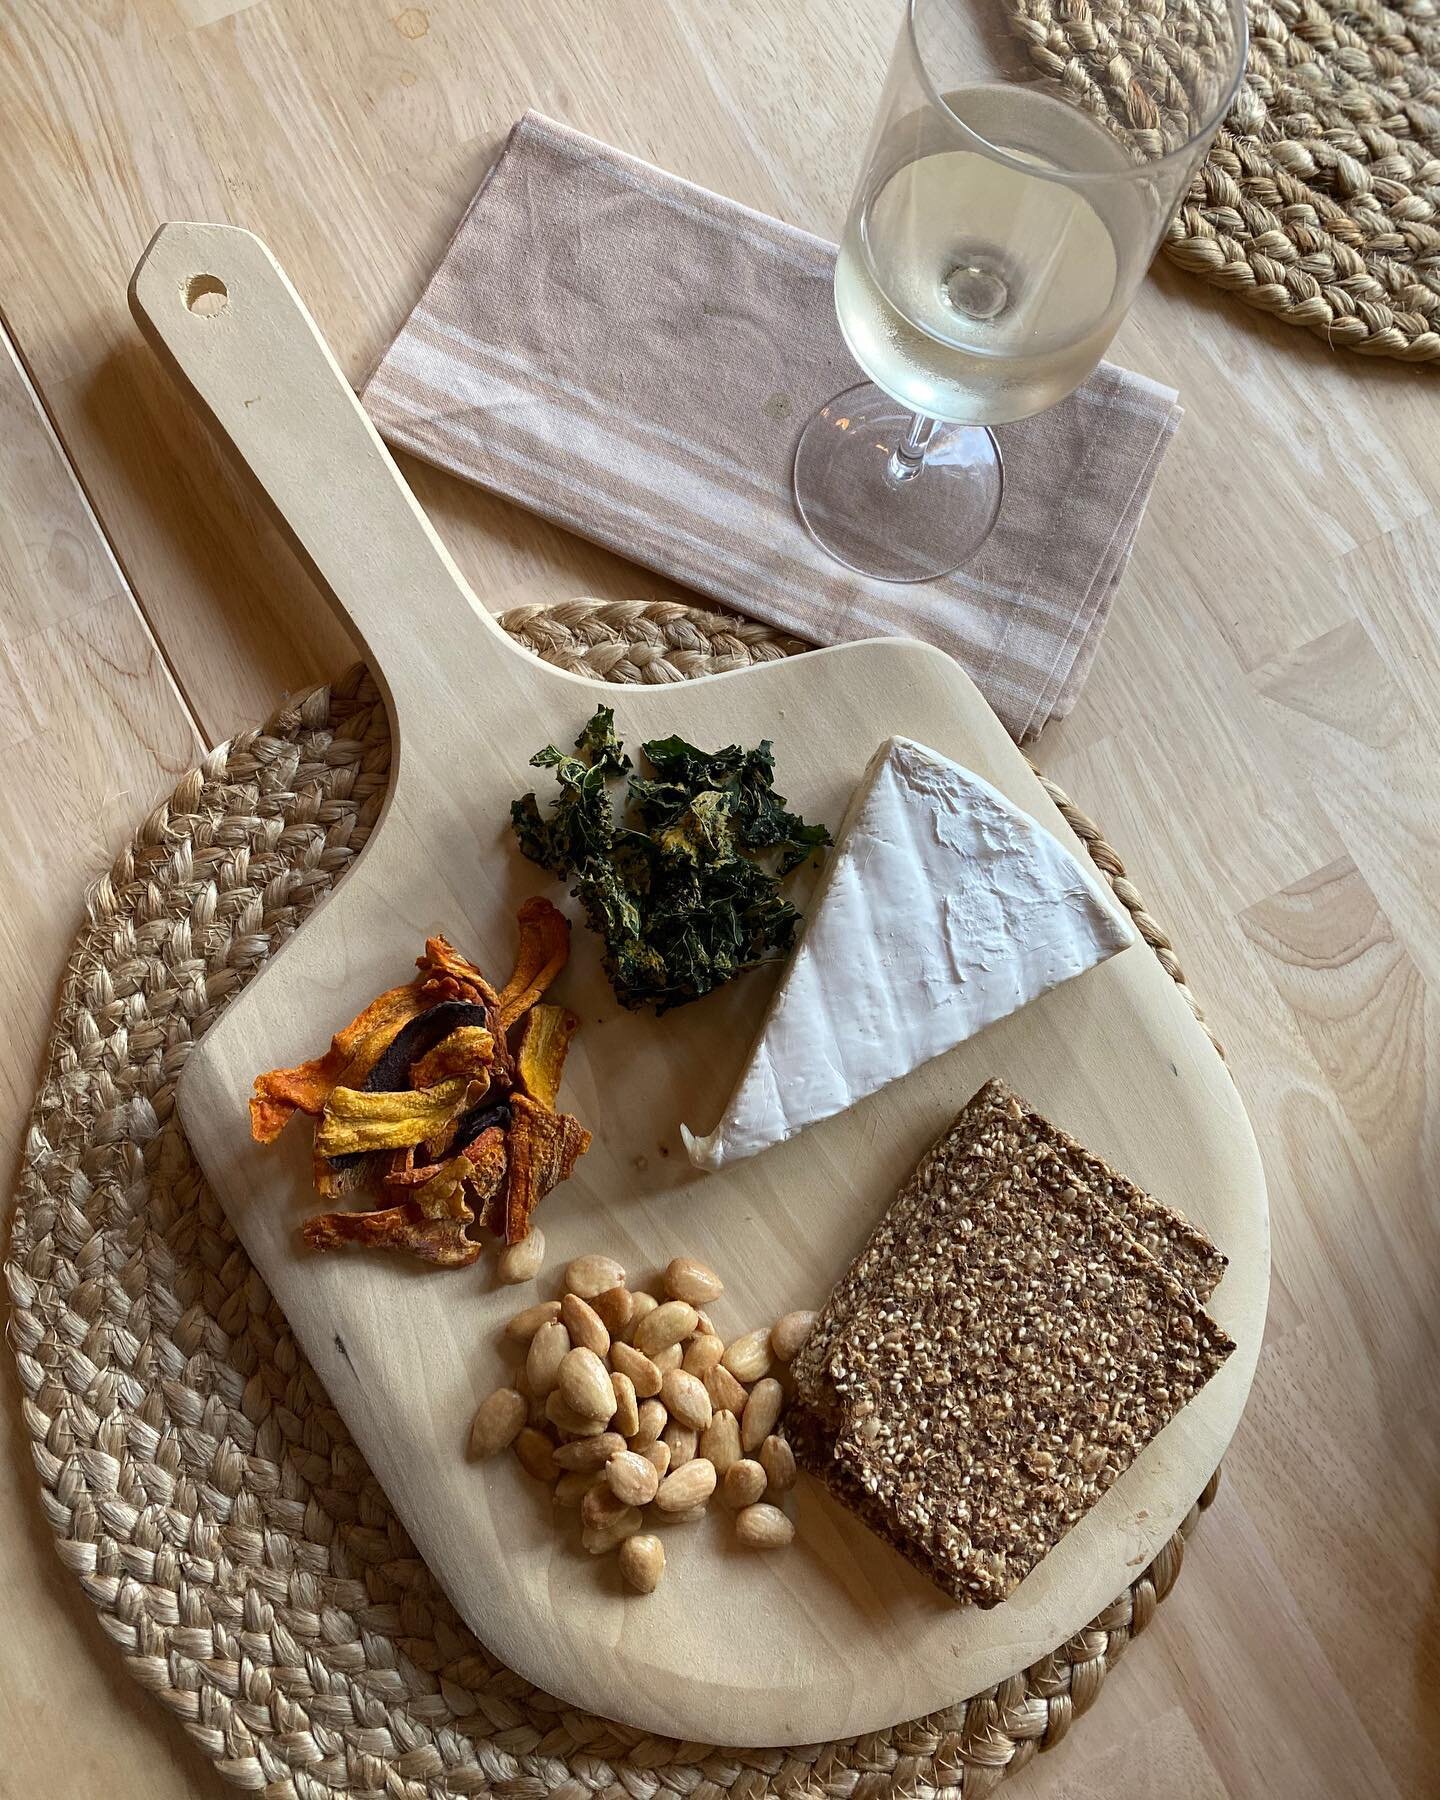 The smoke from the fires in LA is so so bad 😞 We are bunkering down inside today and the upside is definitely this impromptu cheese board&mdash;kale chips, dehydrated carrots, olive oil sea salt almonds, and a triple cream Brie with seed crackers wi